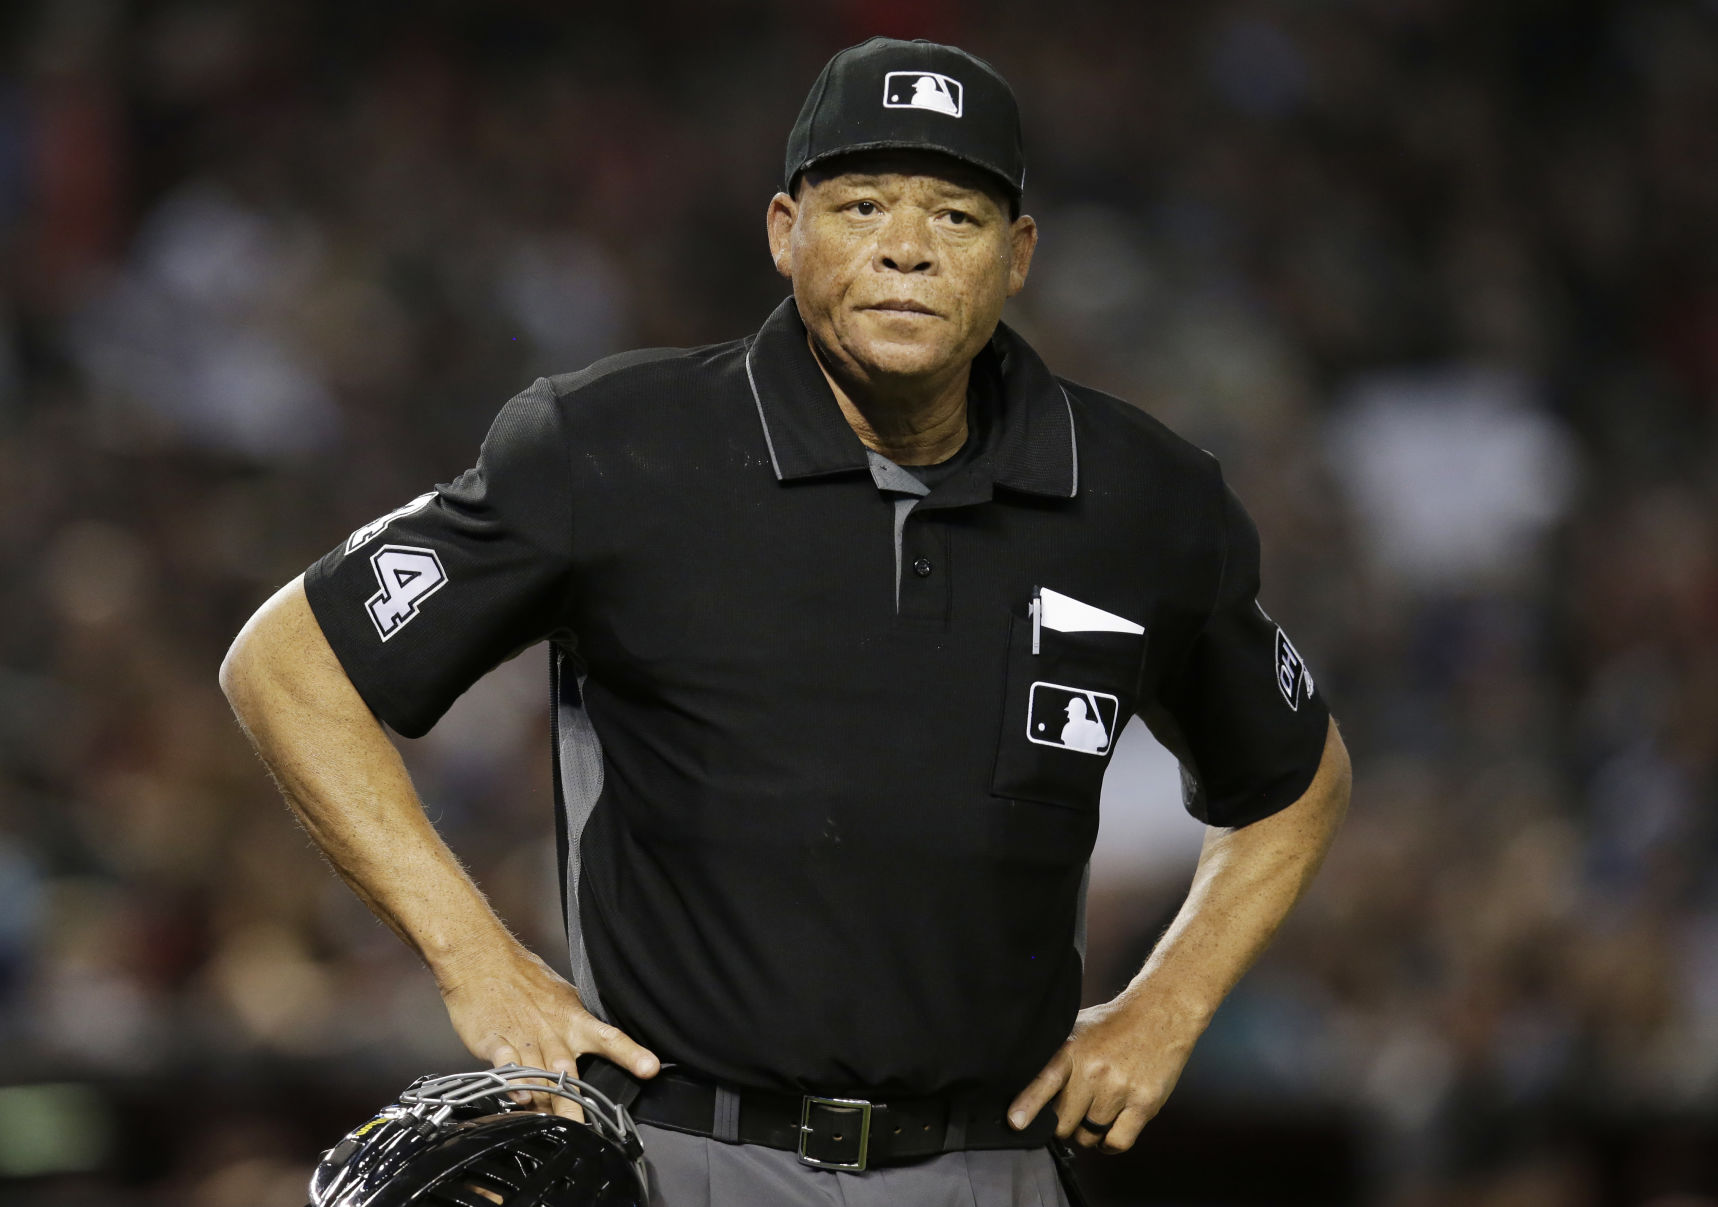 Major league umpires wear wristbands to protest escalating verbal attacks  from players  SBNationcom